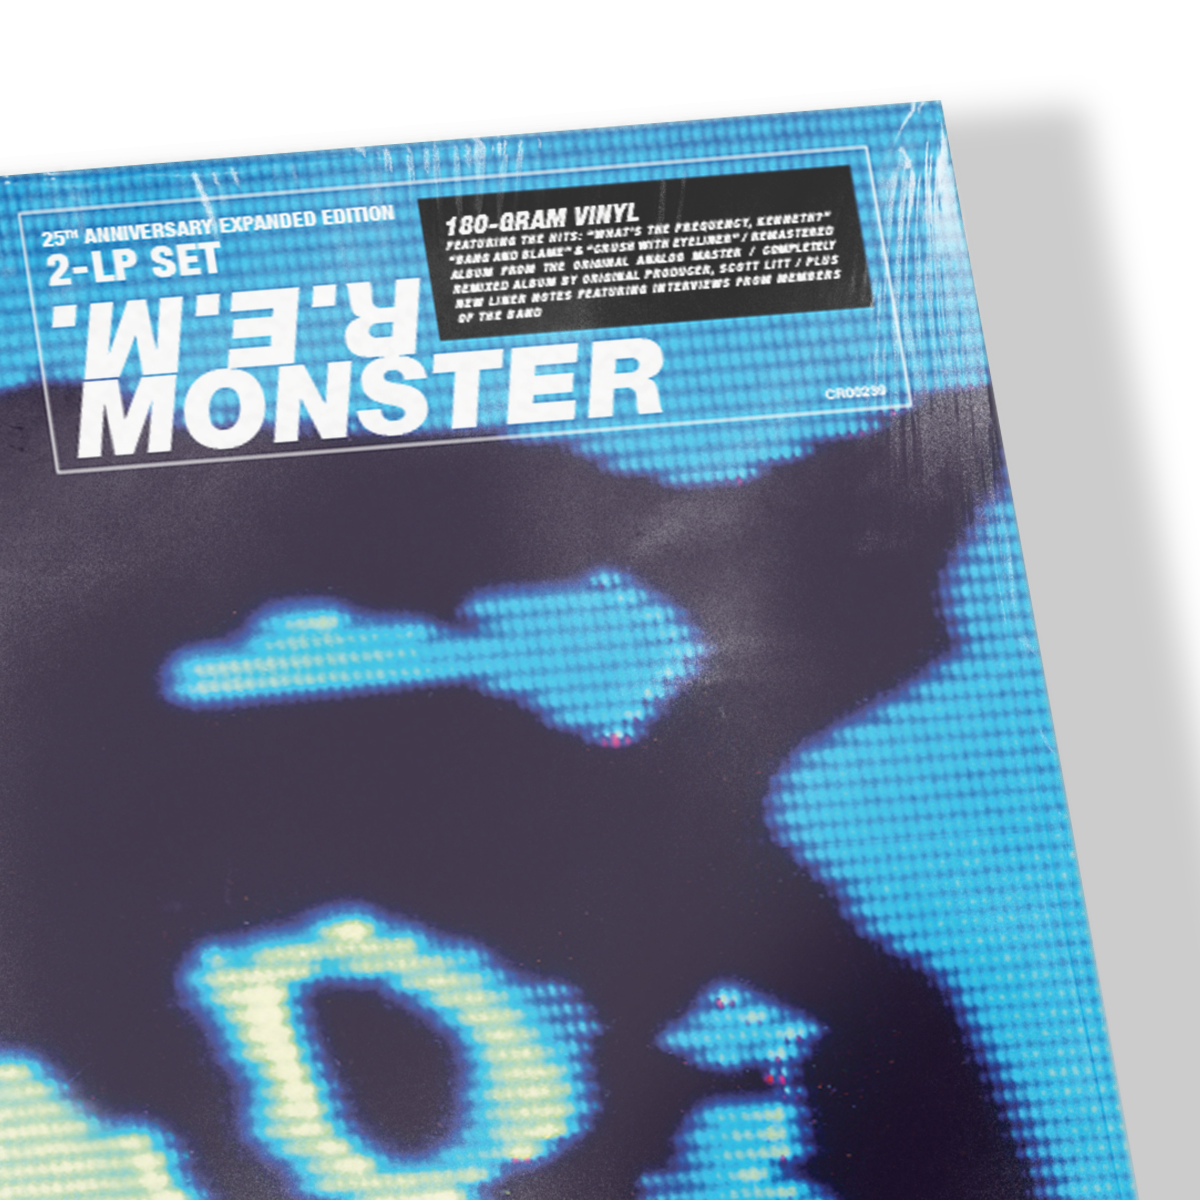 Monster 25th Anniversary - Expanded 2-LP Set - R.E.M.